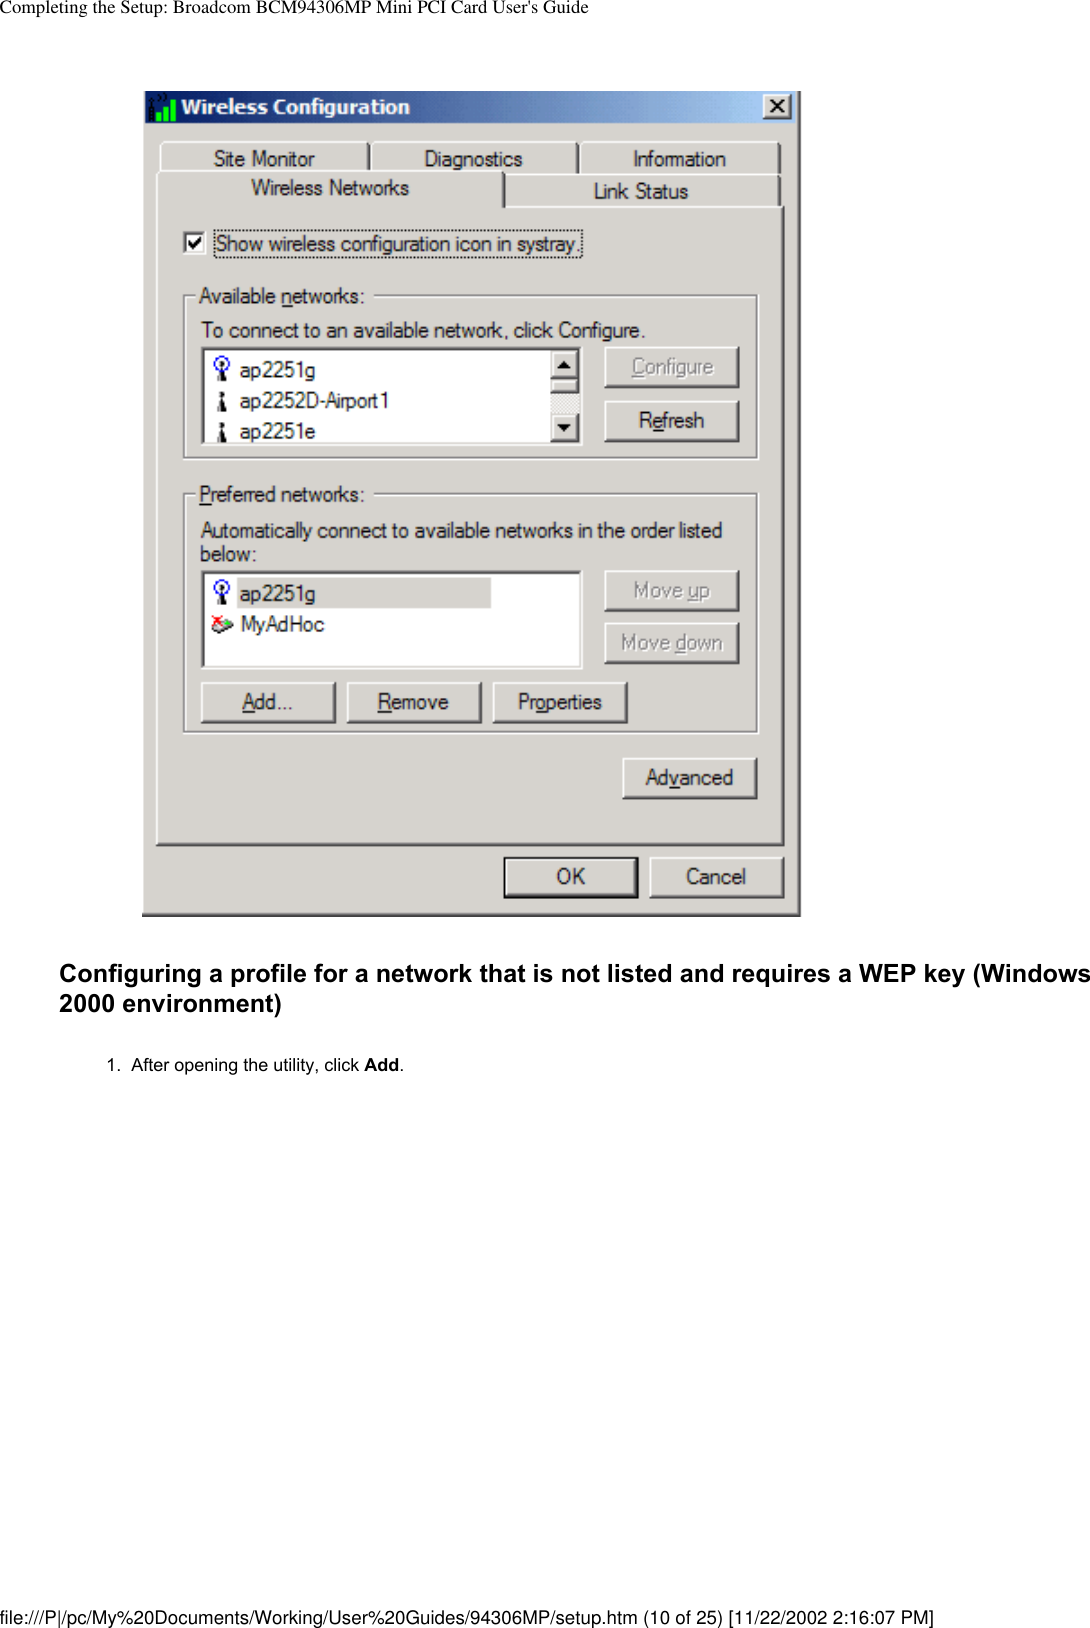 Completing the Setup: Broadcom BCM94306MP Mini PCI Card User&apos;s GuideConfiguring a profile for a network that is not listed and requires a WEP key (Windows 2000 environment)1.  After opening the utility, click Add. file:///P|/pc/My%20Documents/Working/User%20Guides/94306MP/setup.htm (10 of 25) [11/22/2002 2:16:07 PM]